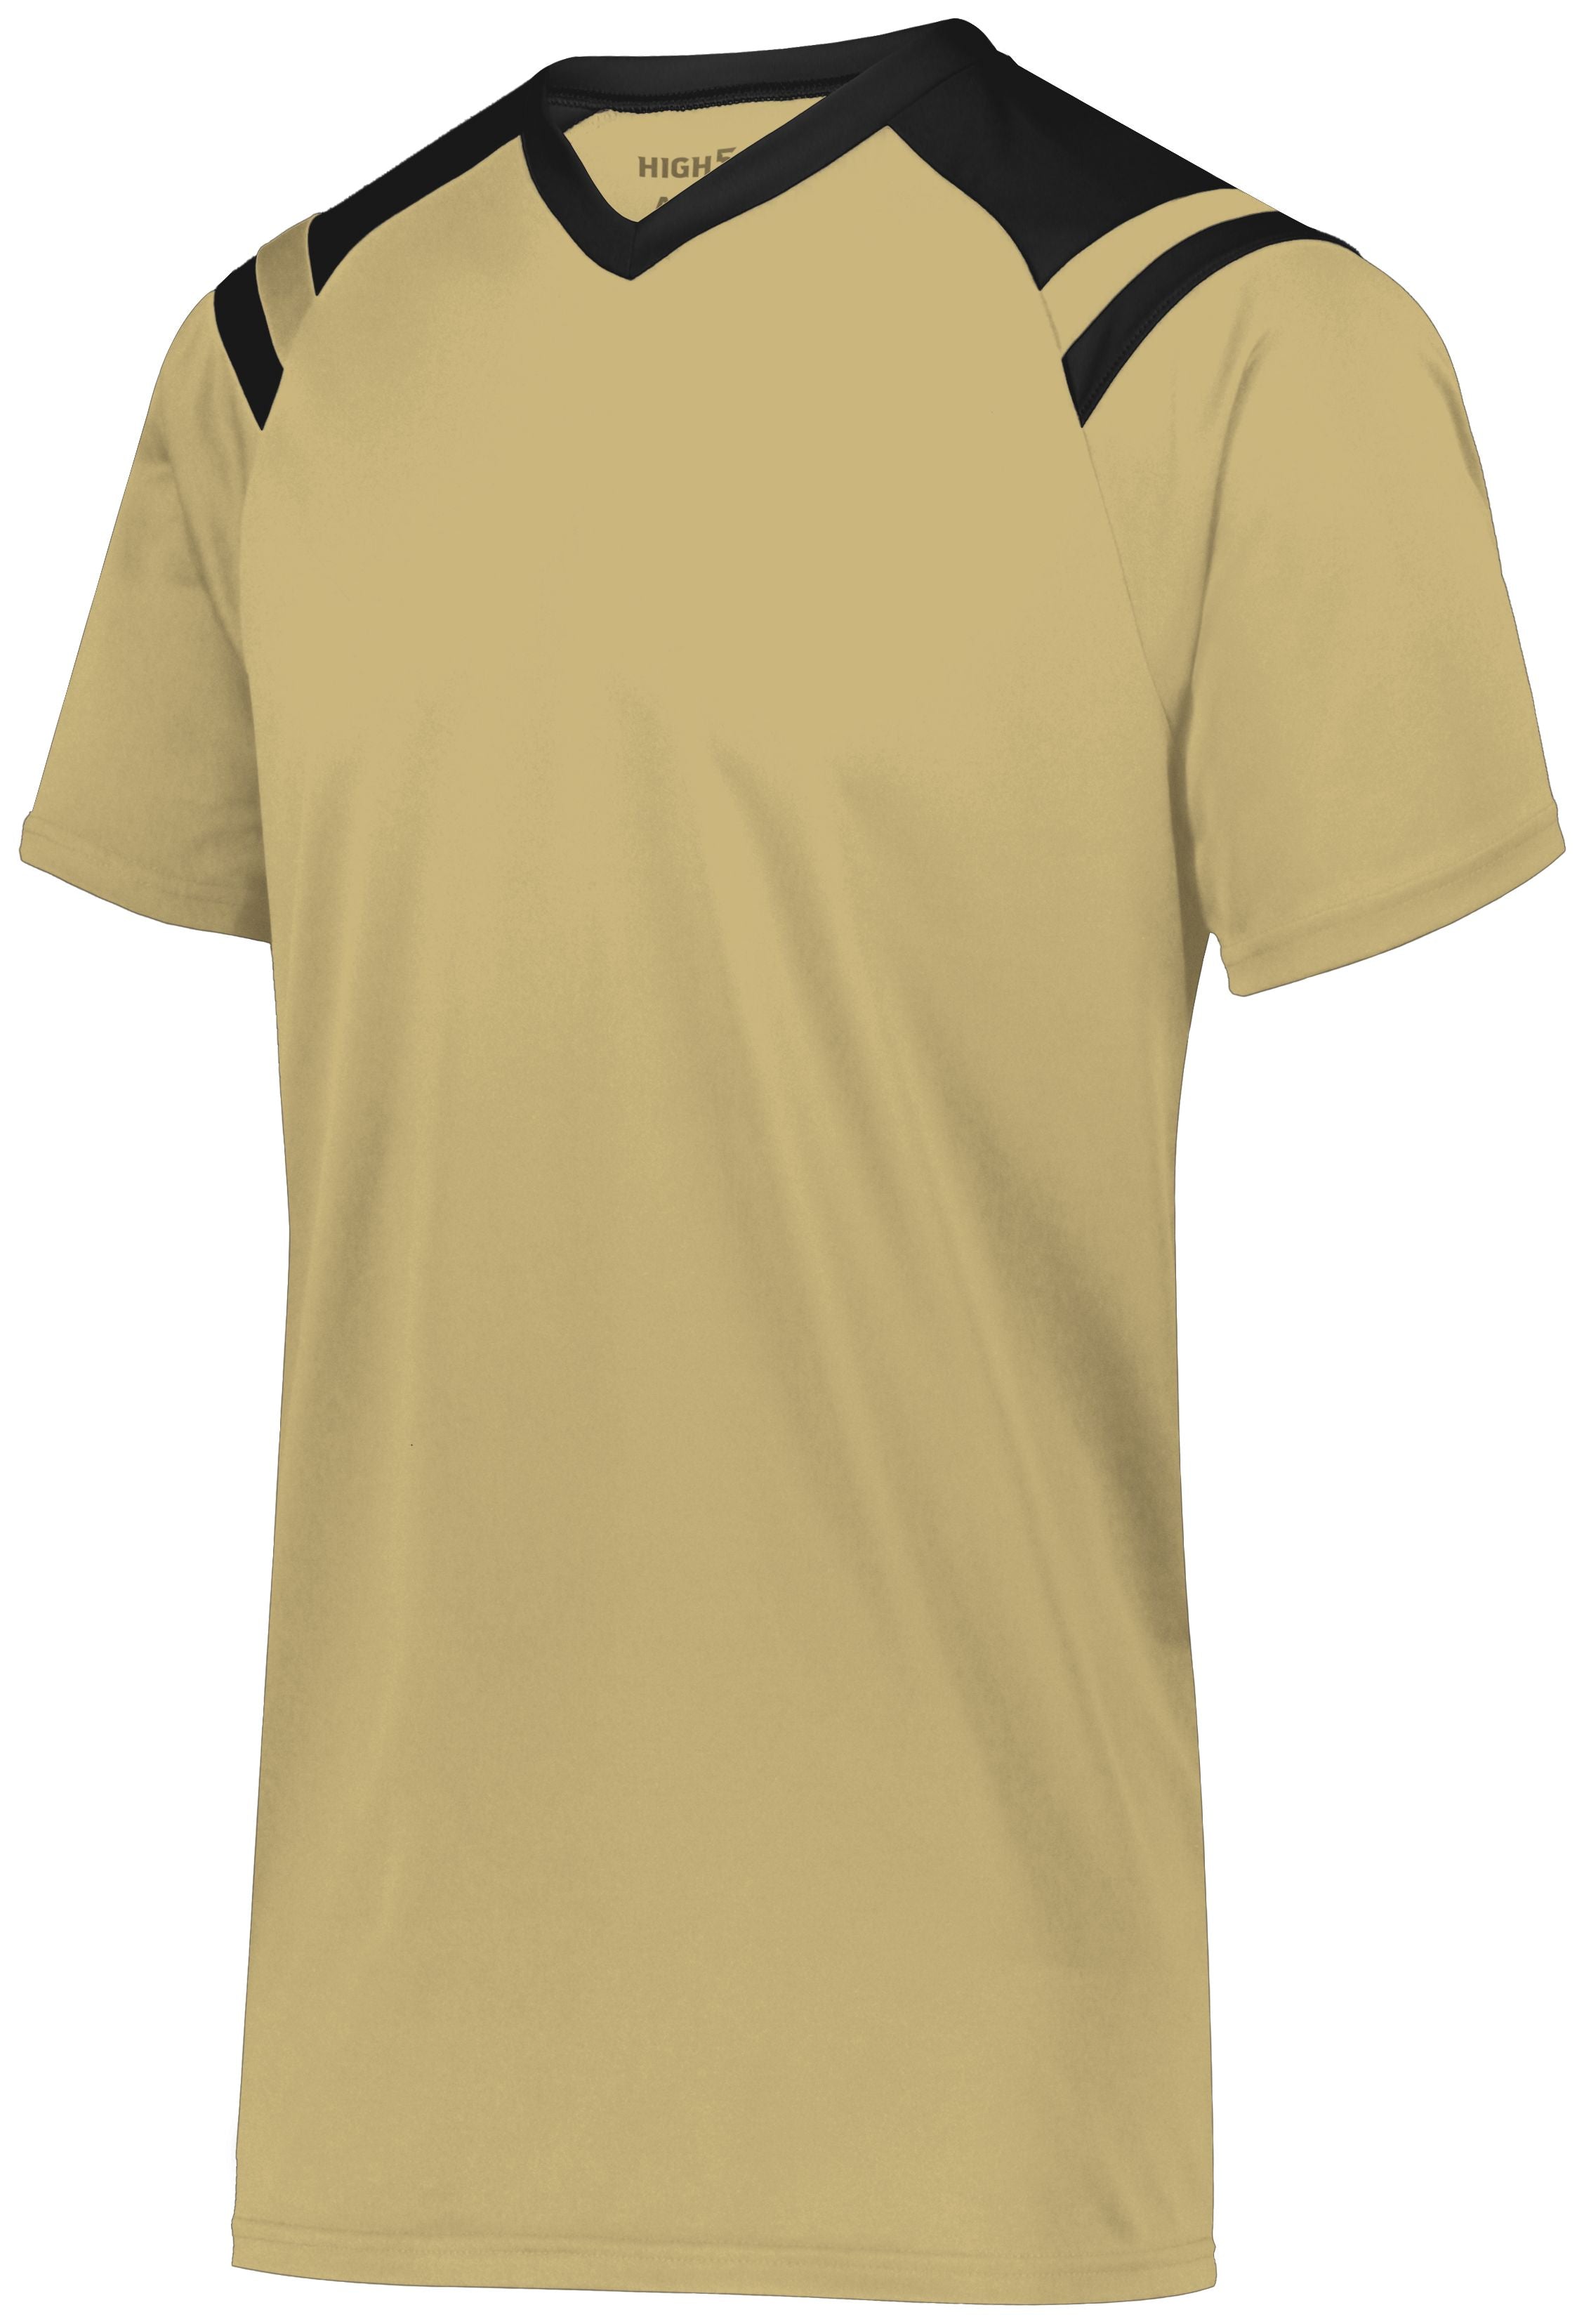 High 5 Youth Sheffield Jersey in Vegas Gold/Black  -Part of the Youth, Youth-Jersey, High5-Products, Soccer, Shirts, All-Sports-1, Sheffield-Soccer-Jerseys product lines at KanaleyCreations.com